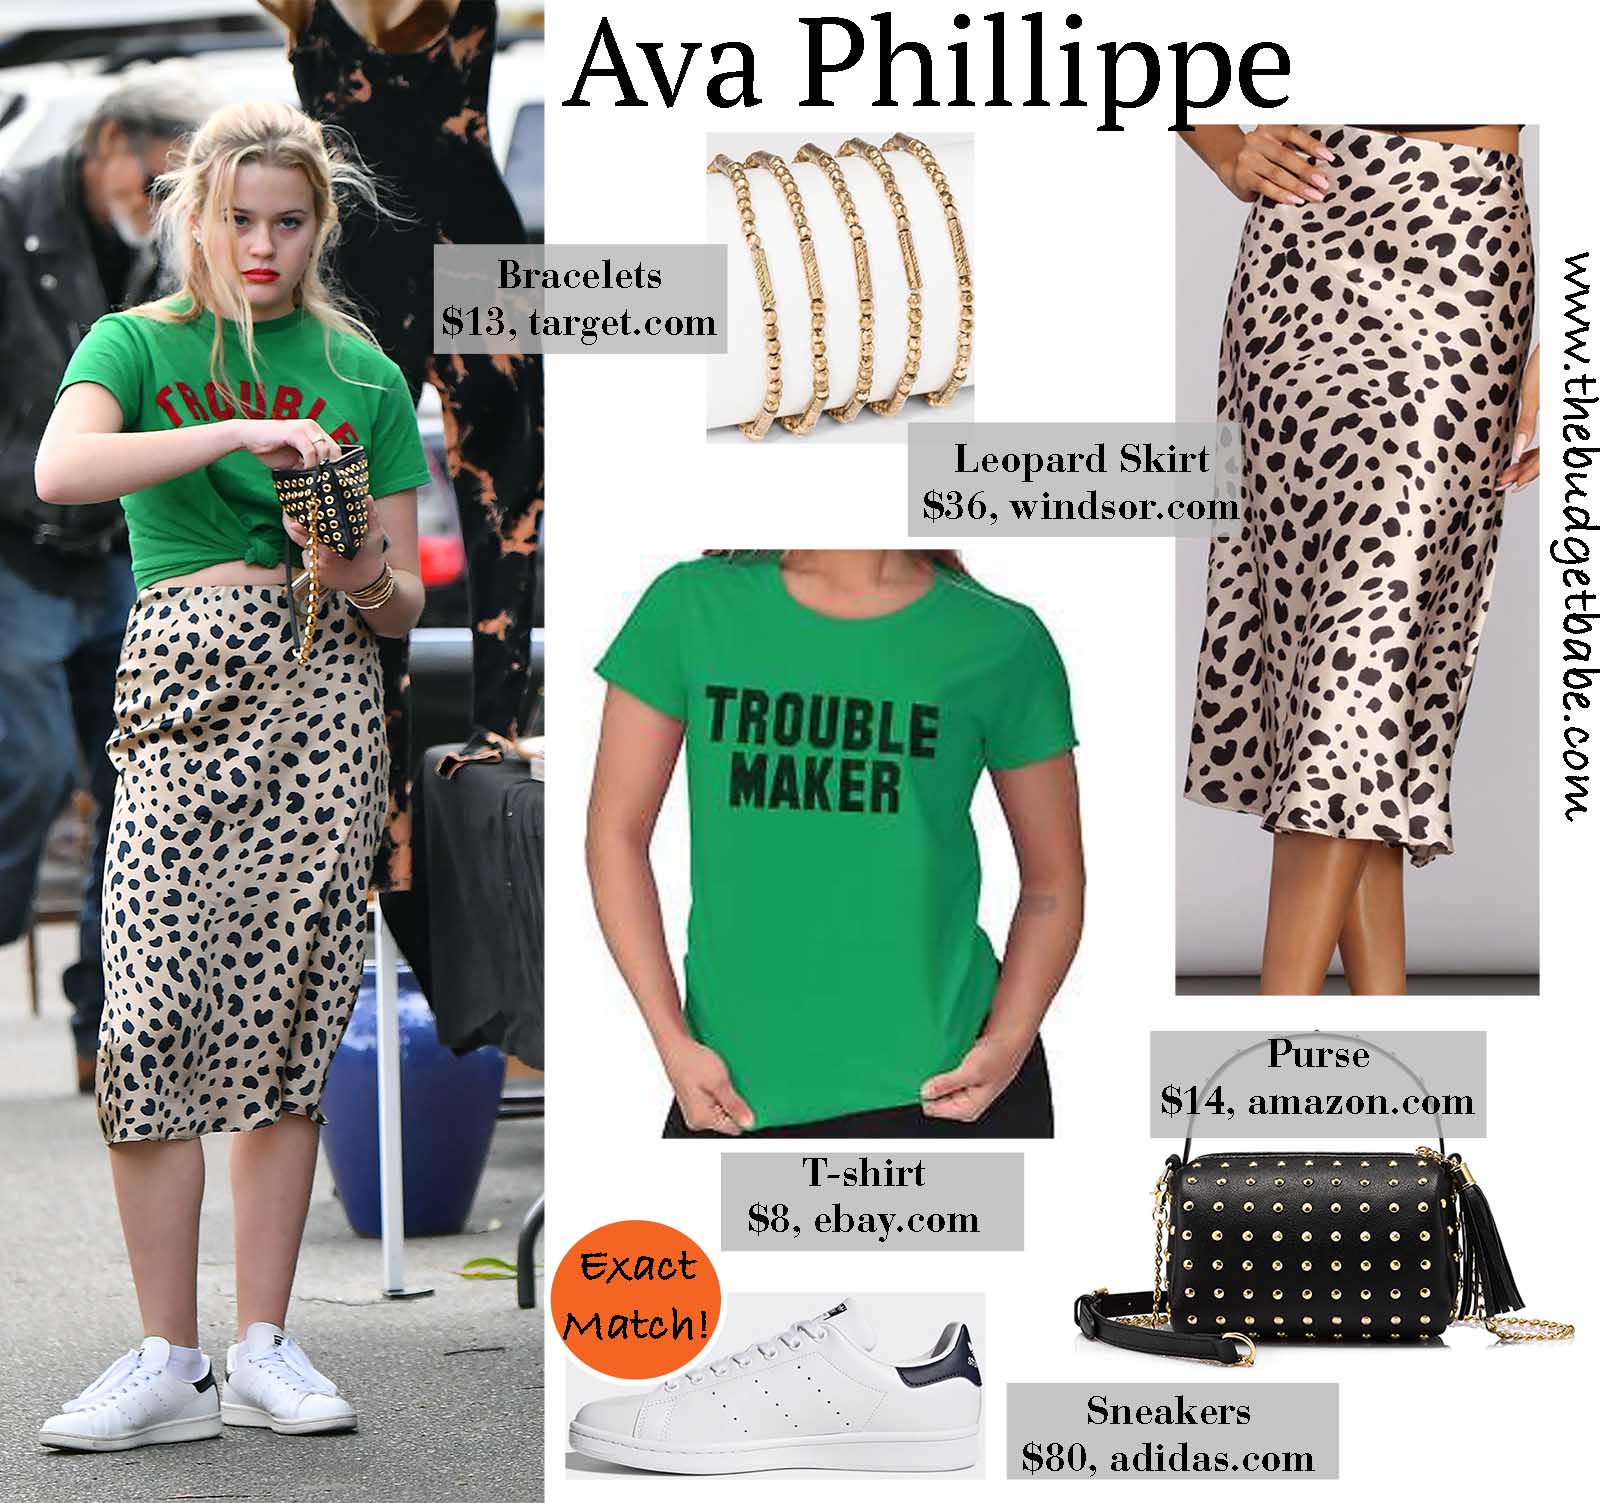 Ava Phillippe switches up her casual look with a satin leopard midi skirt!